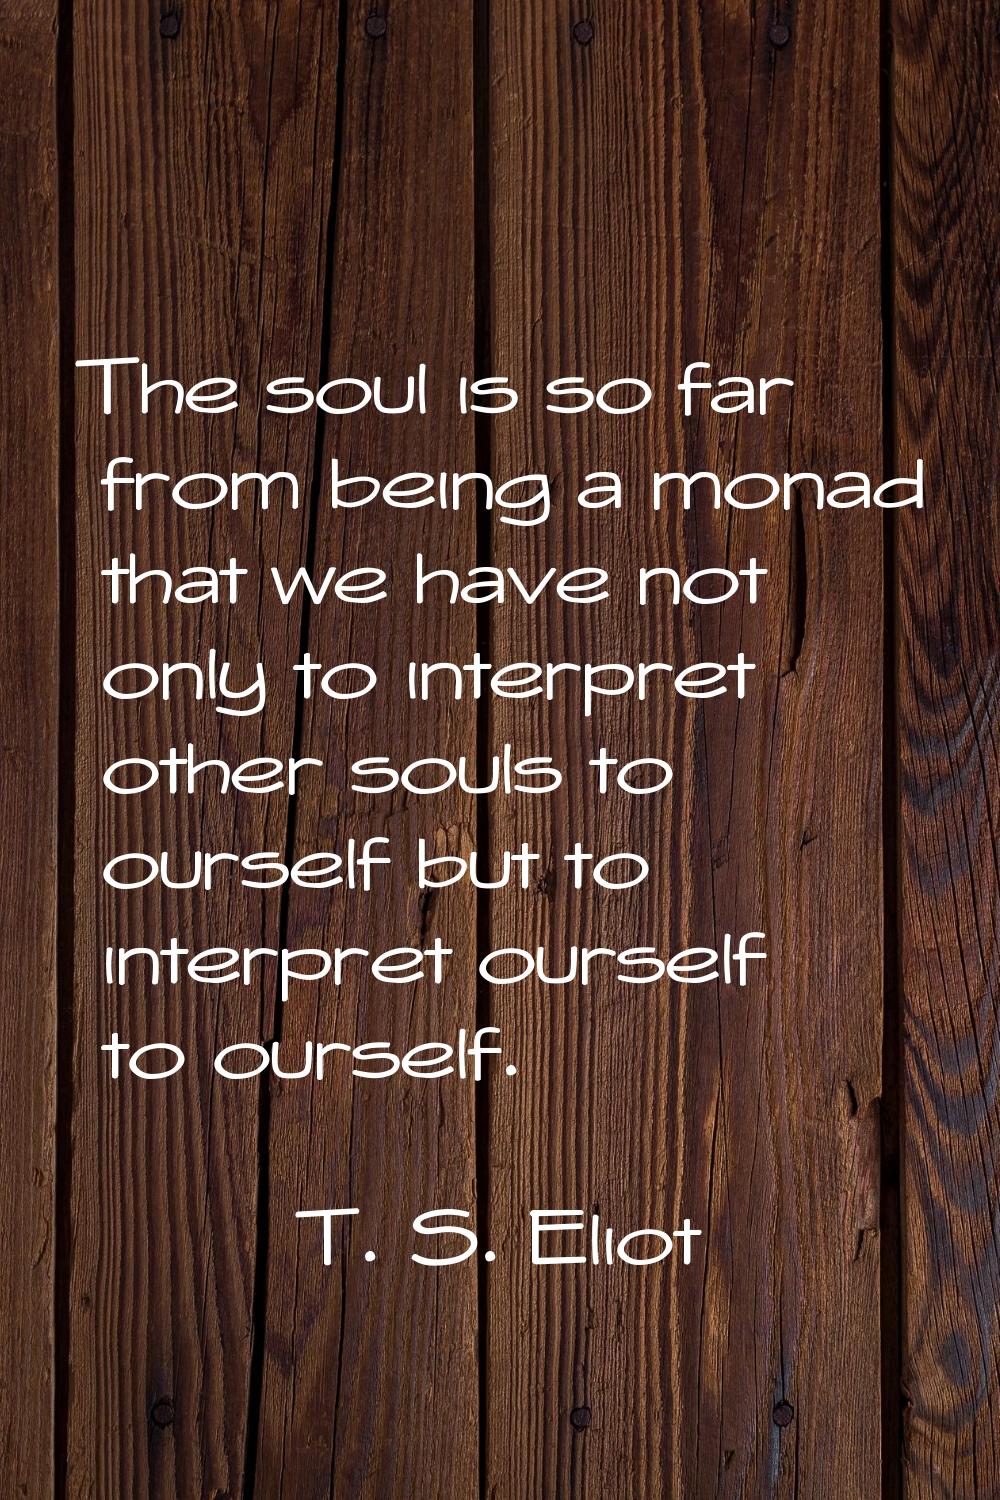 The soul is so far from being a monad that we have not only to interpret other souls to ourself but